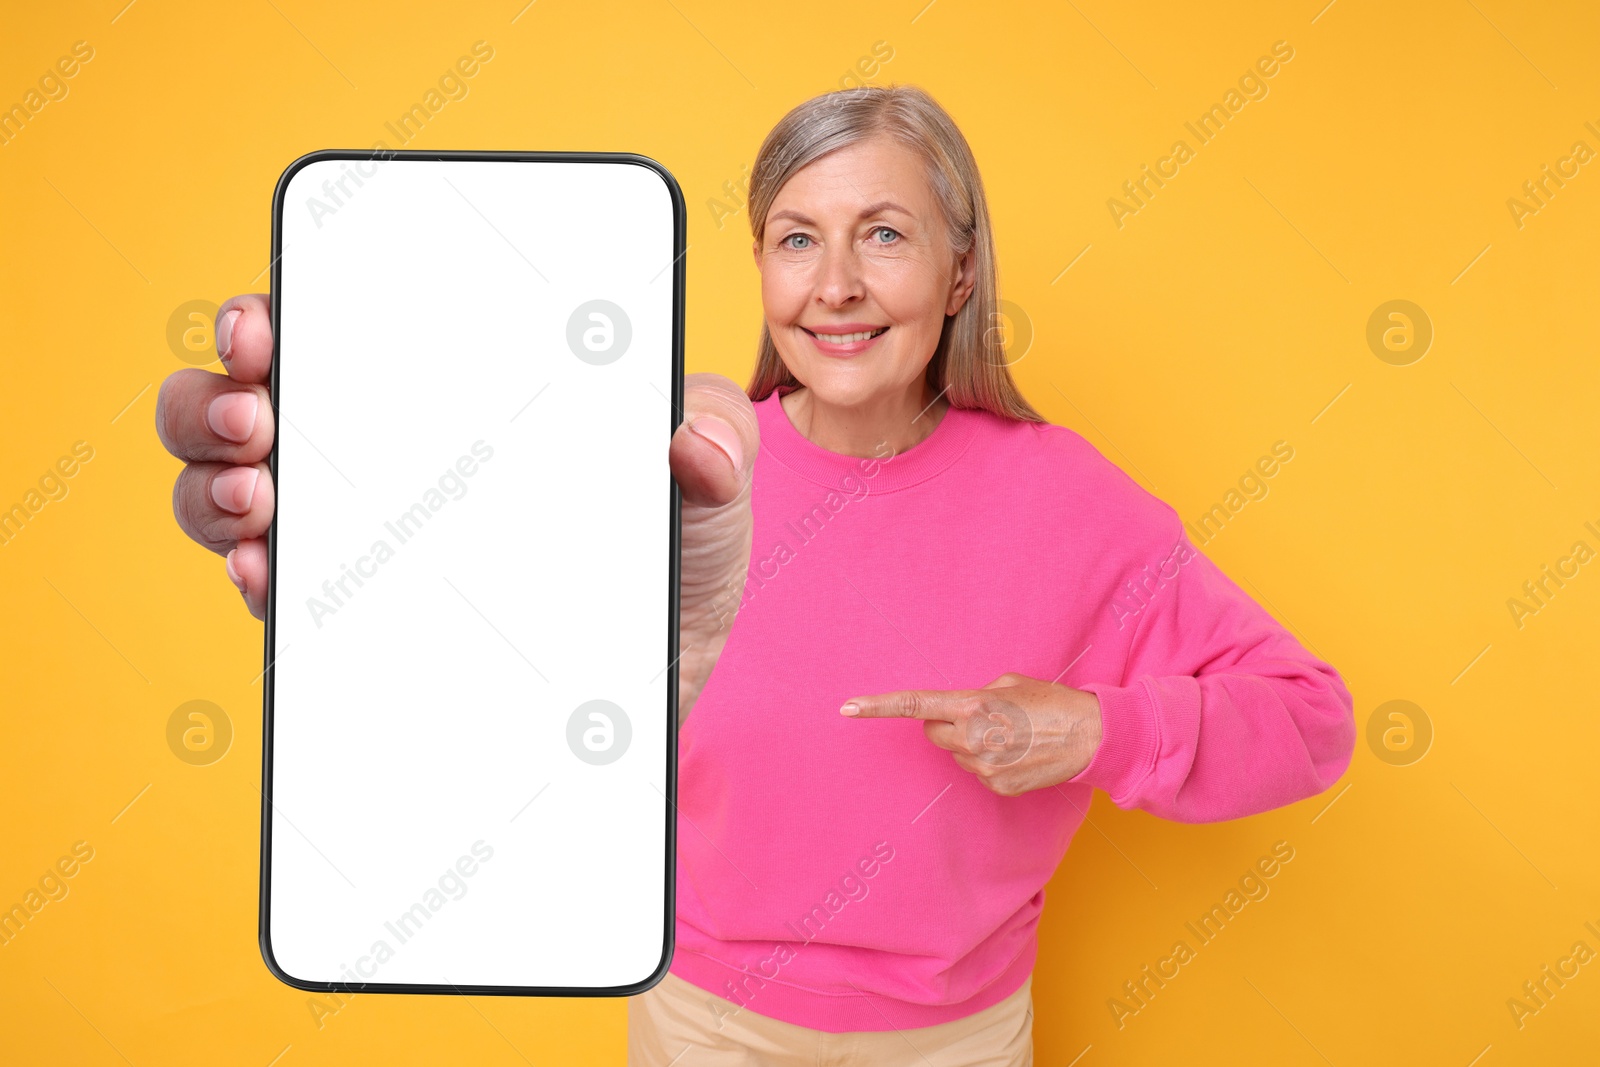 Image of Happy mature woman pointing at mobile phone with blank screen on golden background. Mockup for design